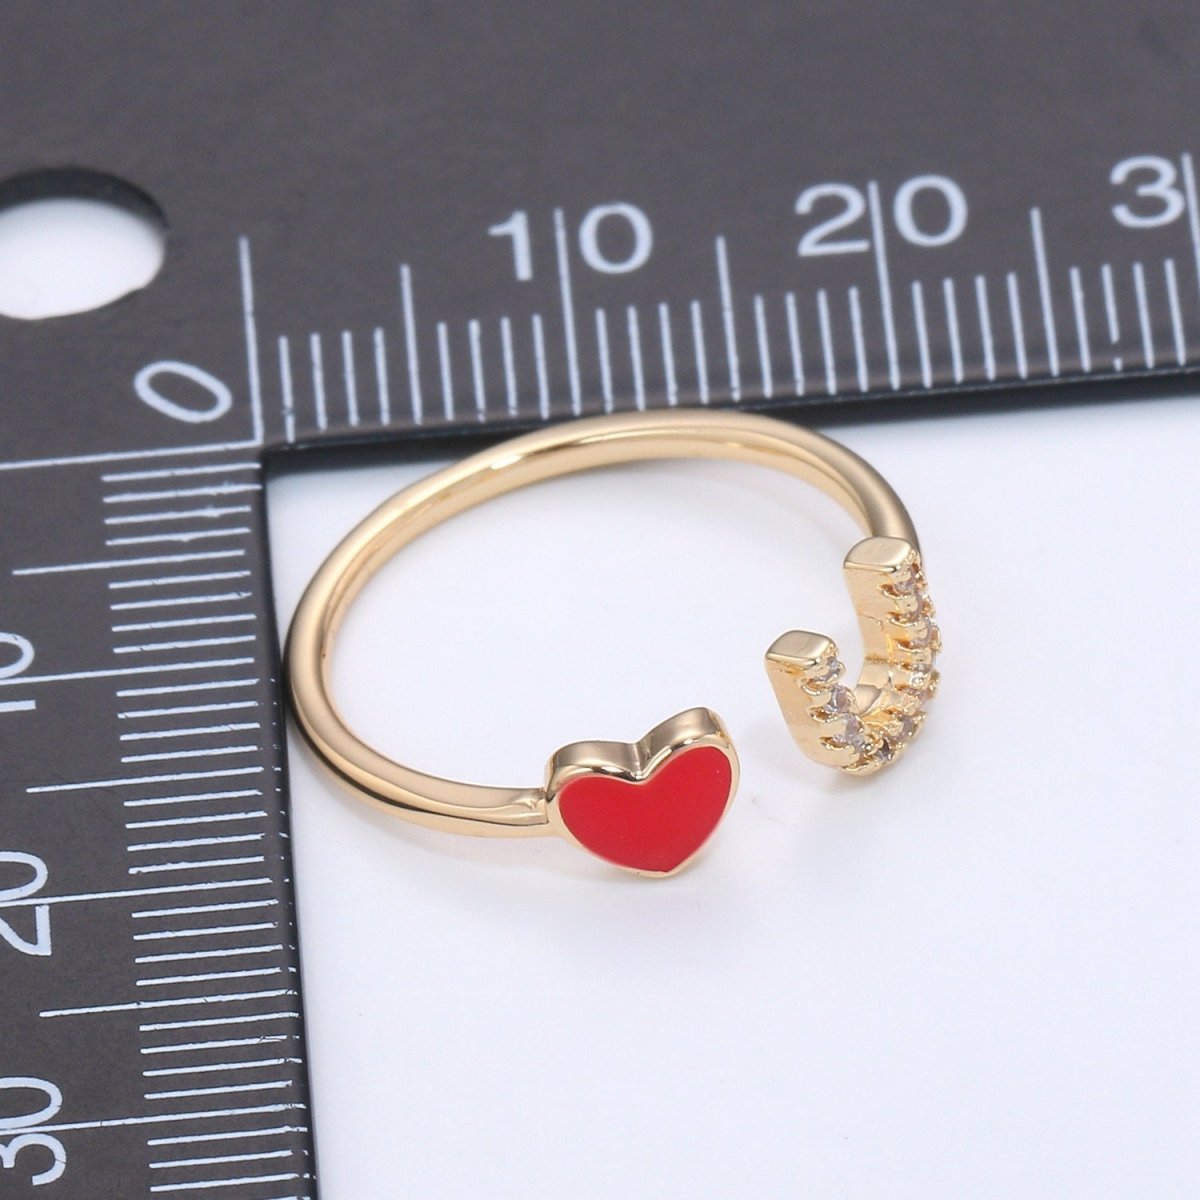 Gold Rings For Women Gold Cz Ring Red Heart Ring Dainty Ring Minimalist Ring Christmast Gift Thin Open Ring Gold Jewelry Heart Ring Love u R-076 - DLUXCA